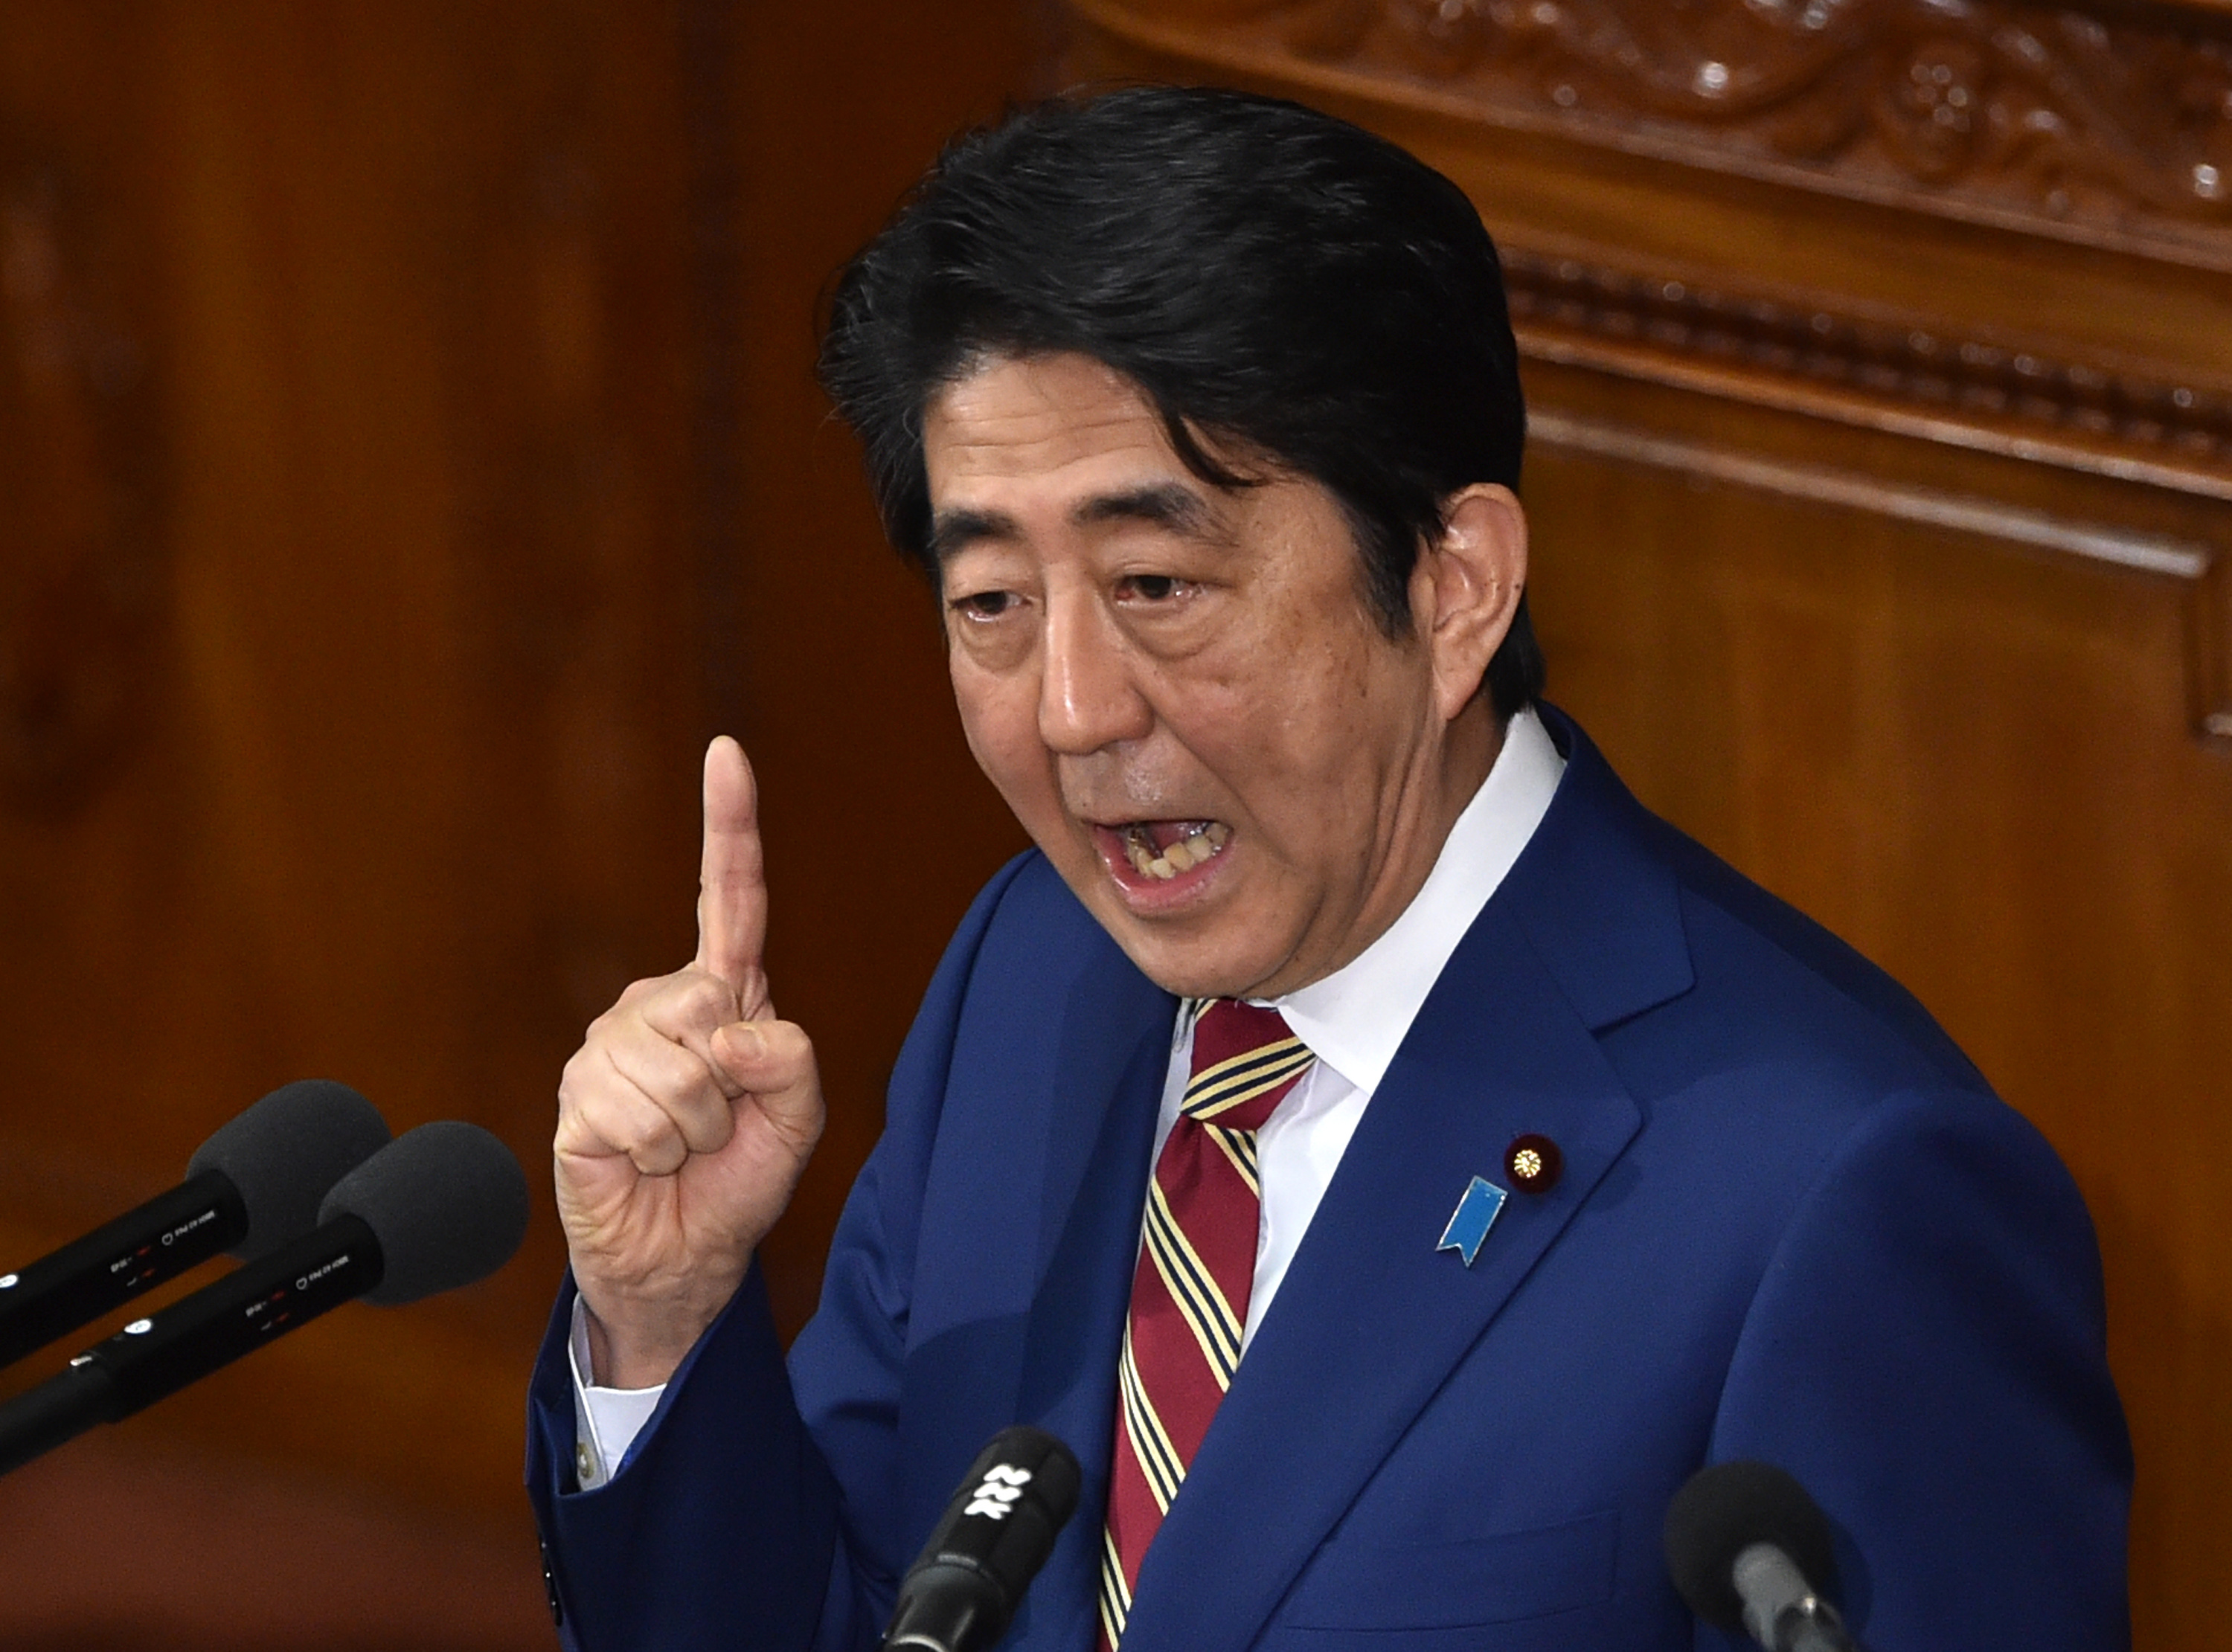 Japanese Prime Minister Shinzo Abe delivers his policy speech during a plenary session of the House of Representatives in Tokyo on Jan. 22, 2016. (Kazuhiro Nogi—AFP/Getty Images)